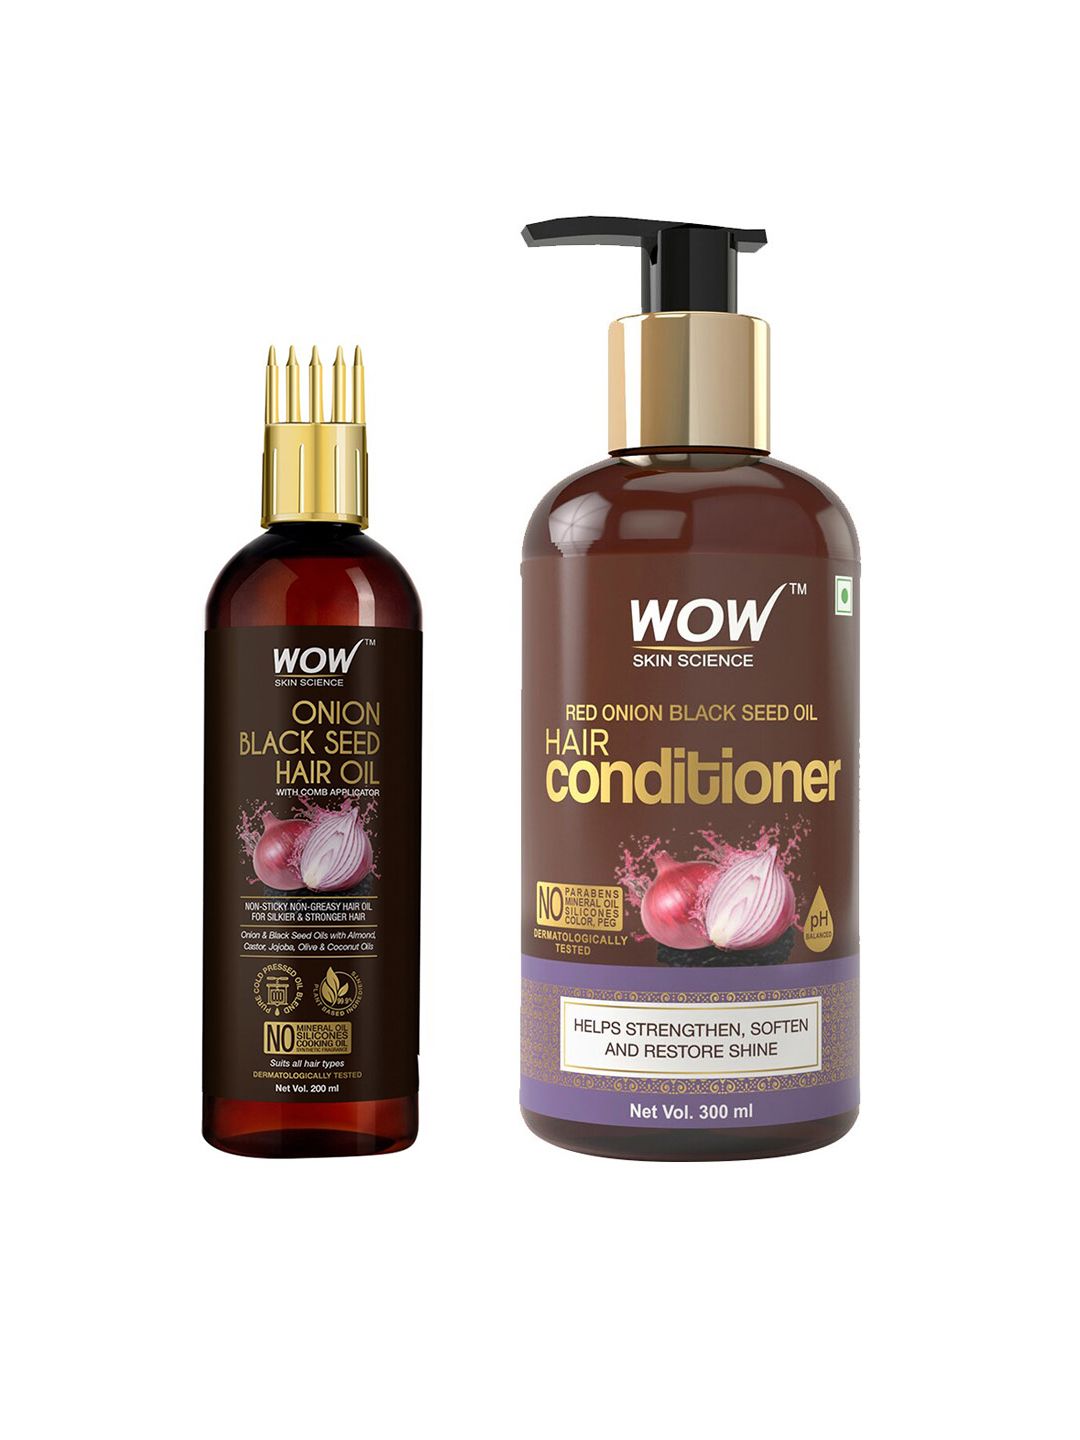 WOW SKIN SCIENCE Set of Onion Black Seed Hair Oil & Red Onion Black Seed Oil Conditioner Price in India